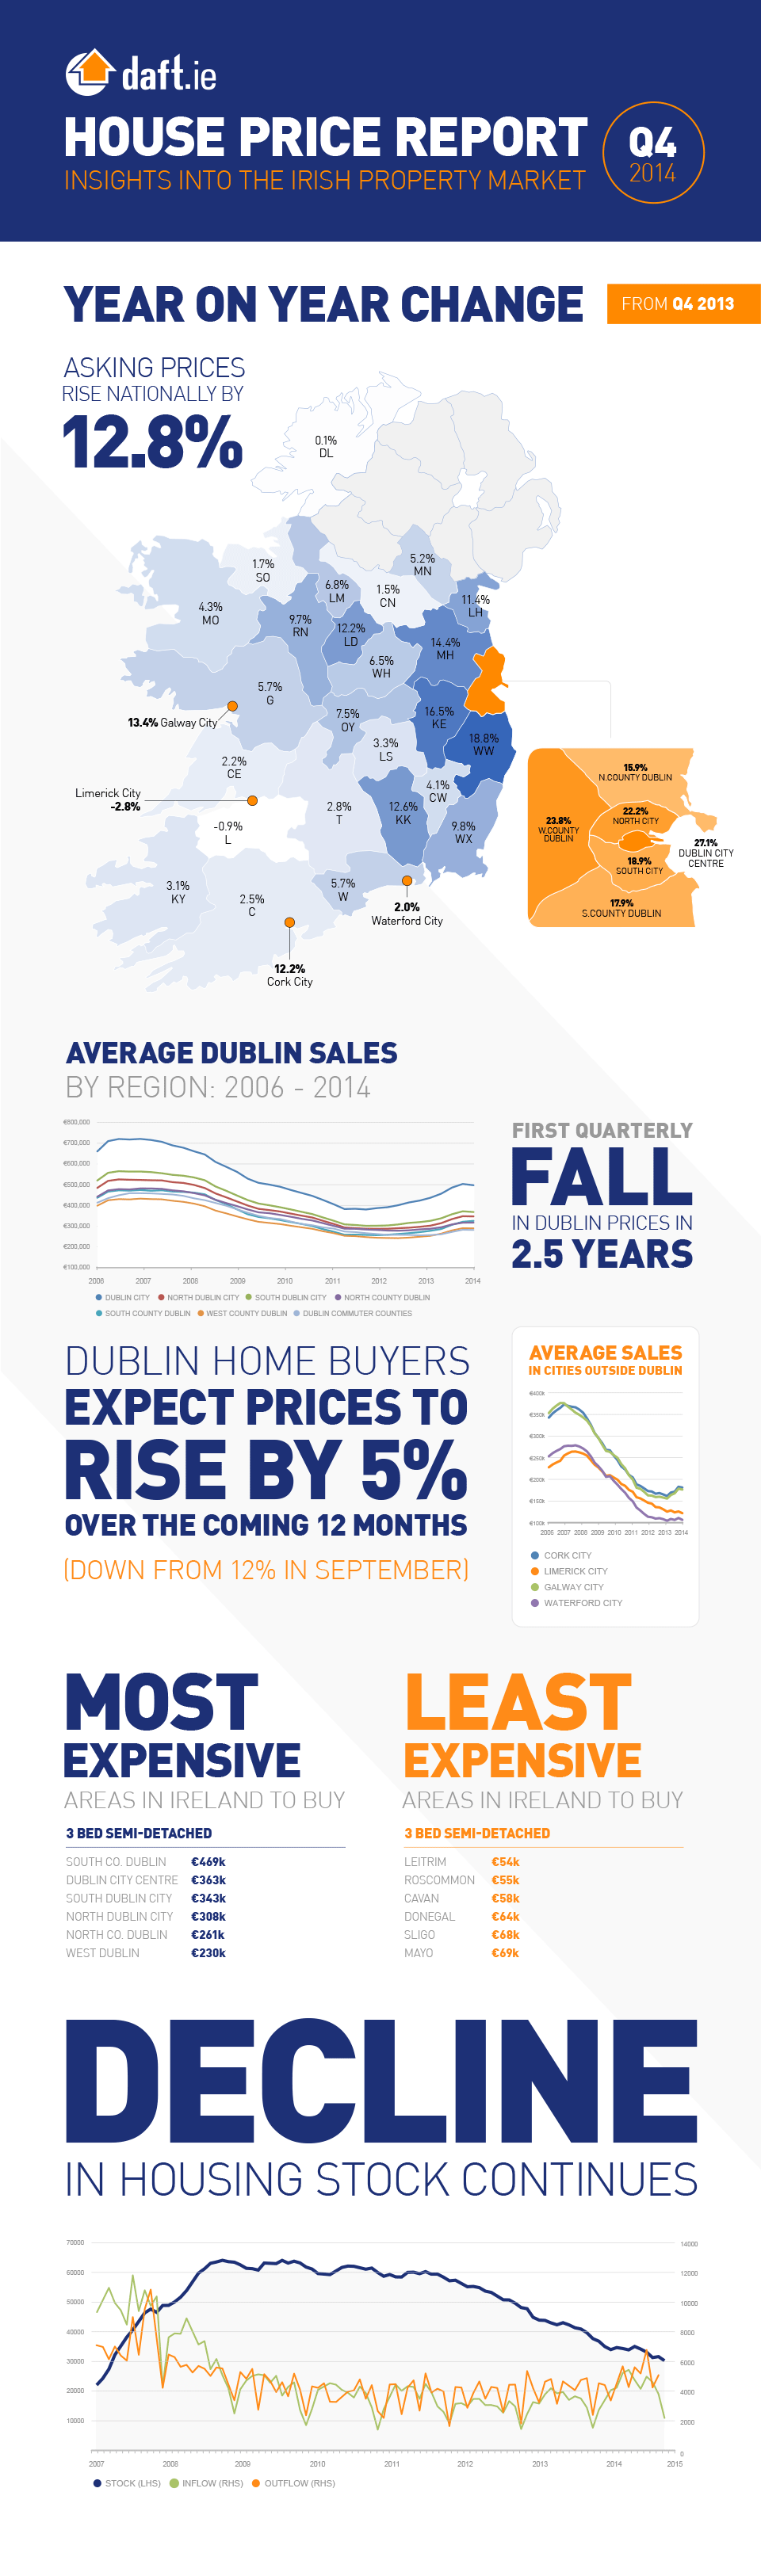 Daft.ie House Price Report: Q4 2014 Infographic